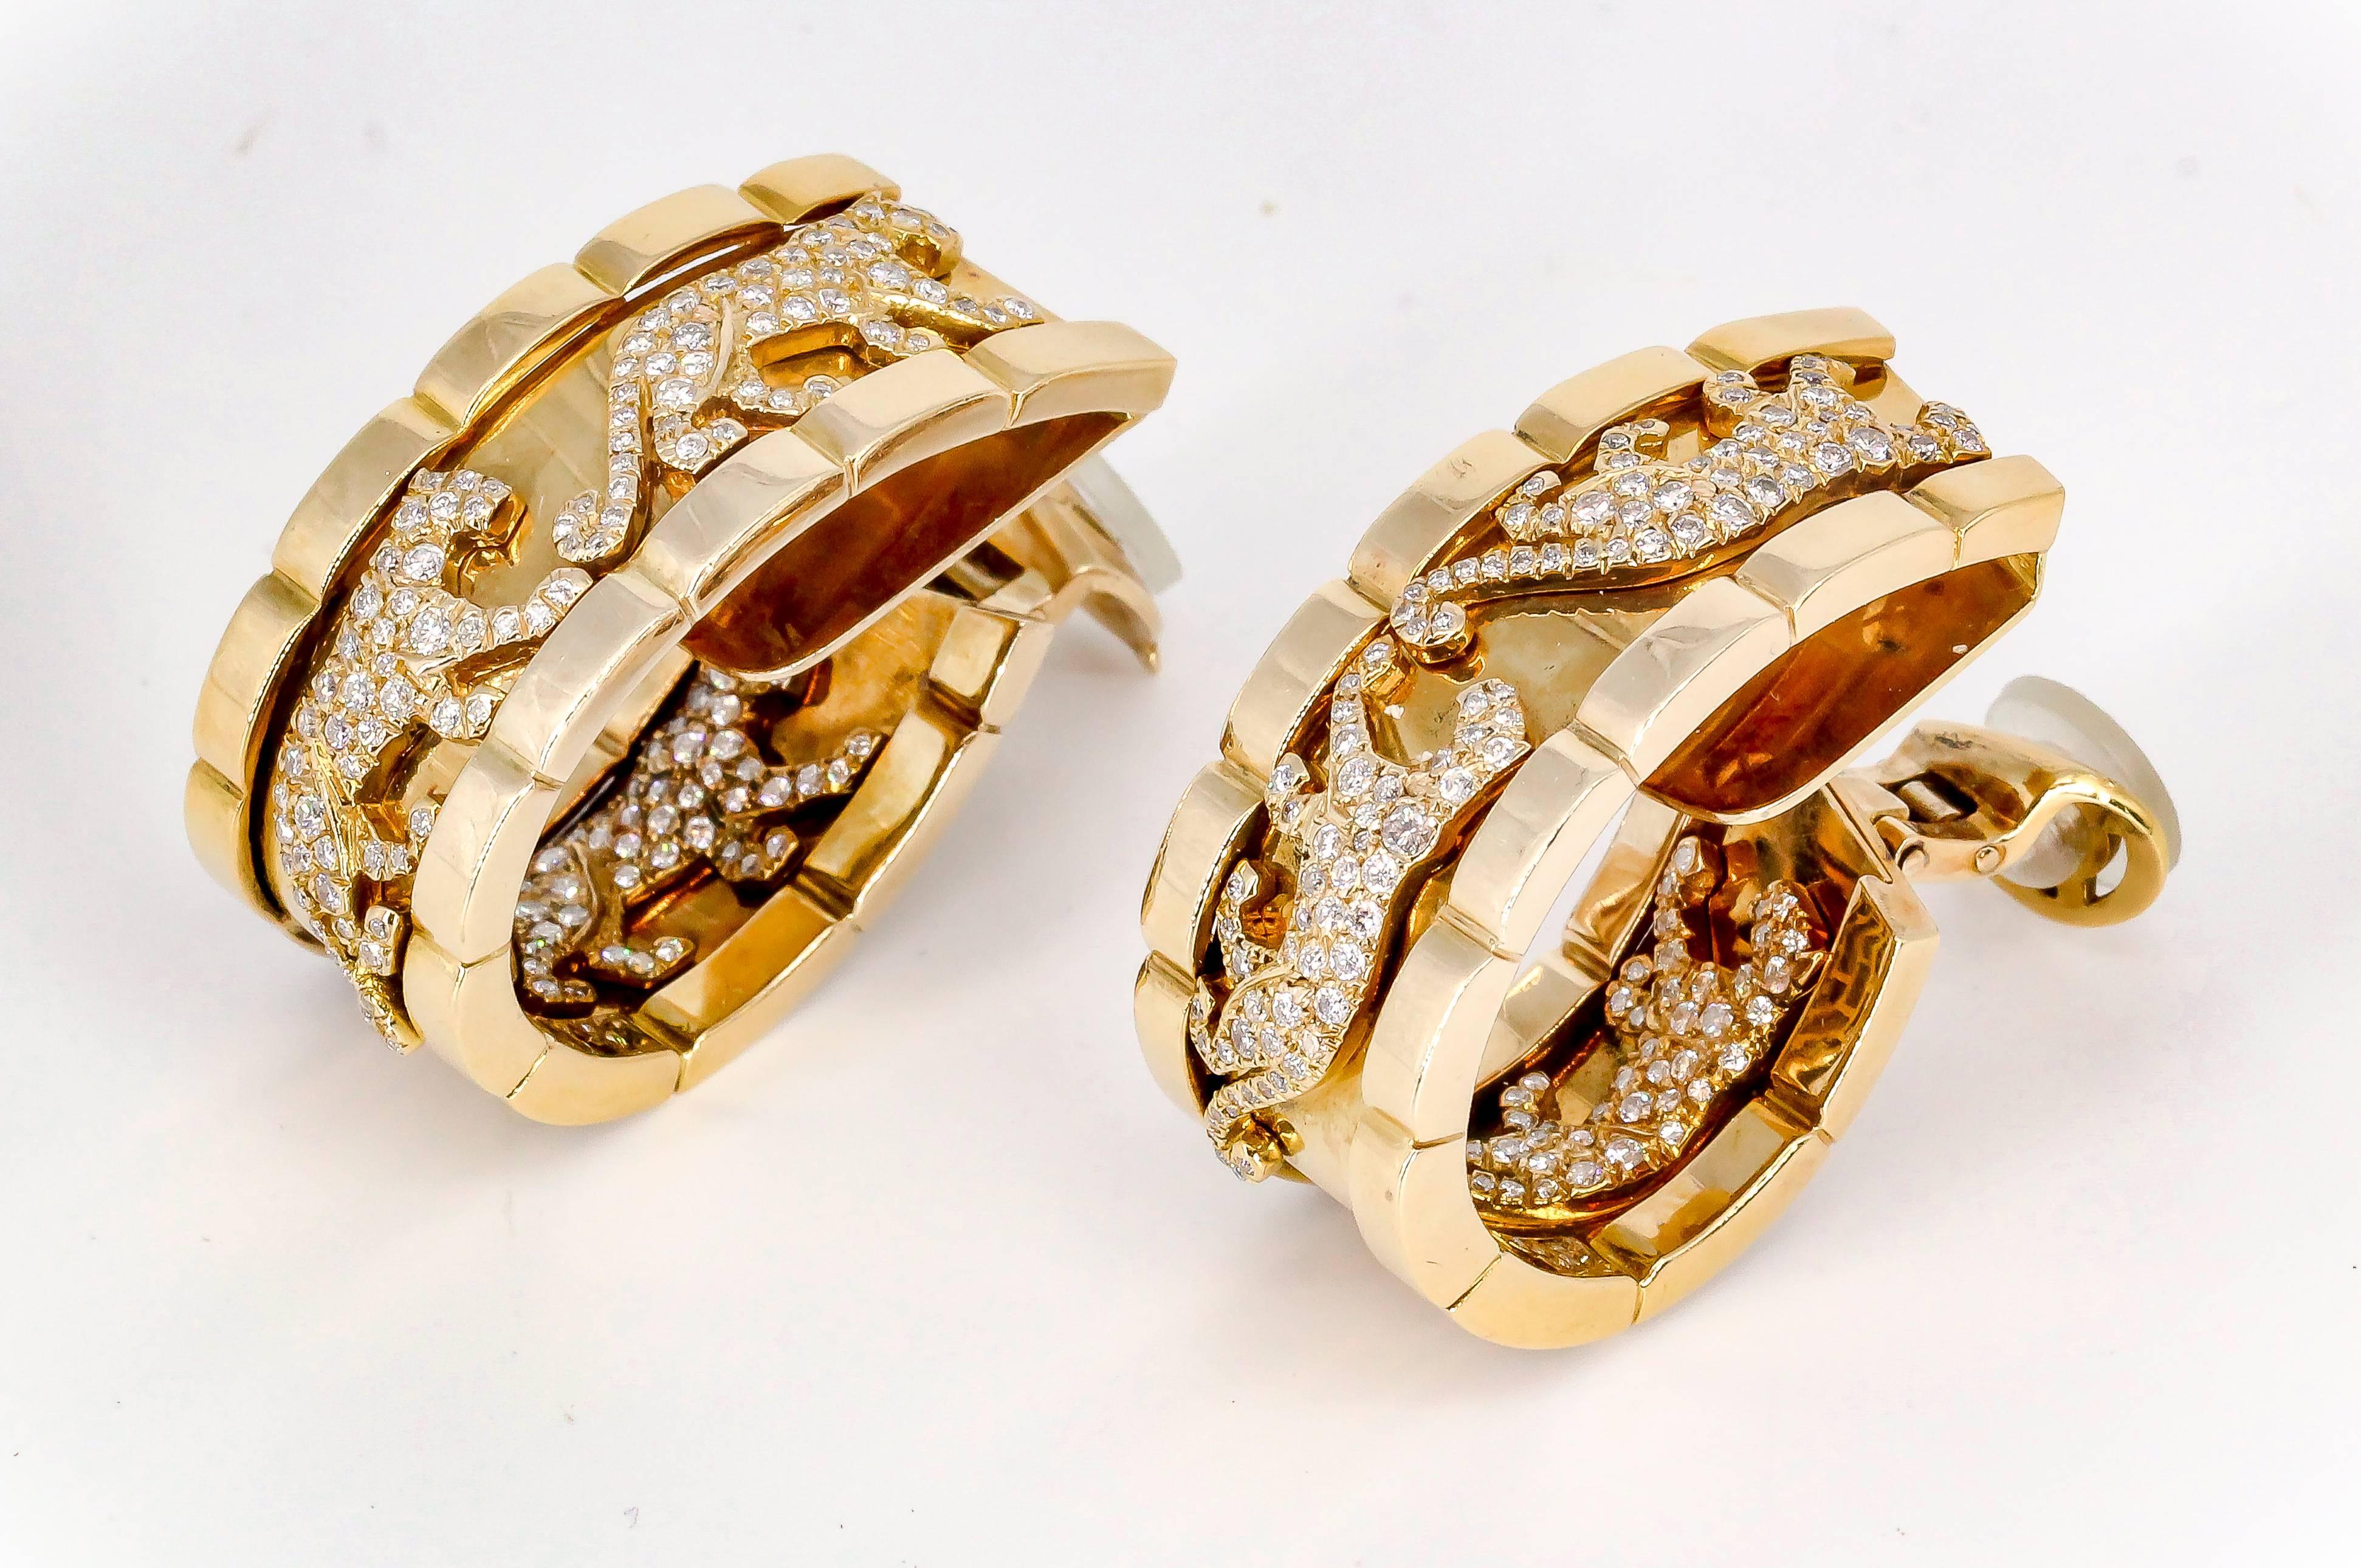 Striking diamond and 18K yellow gold inside out hoop earrings from the 